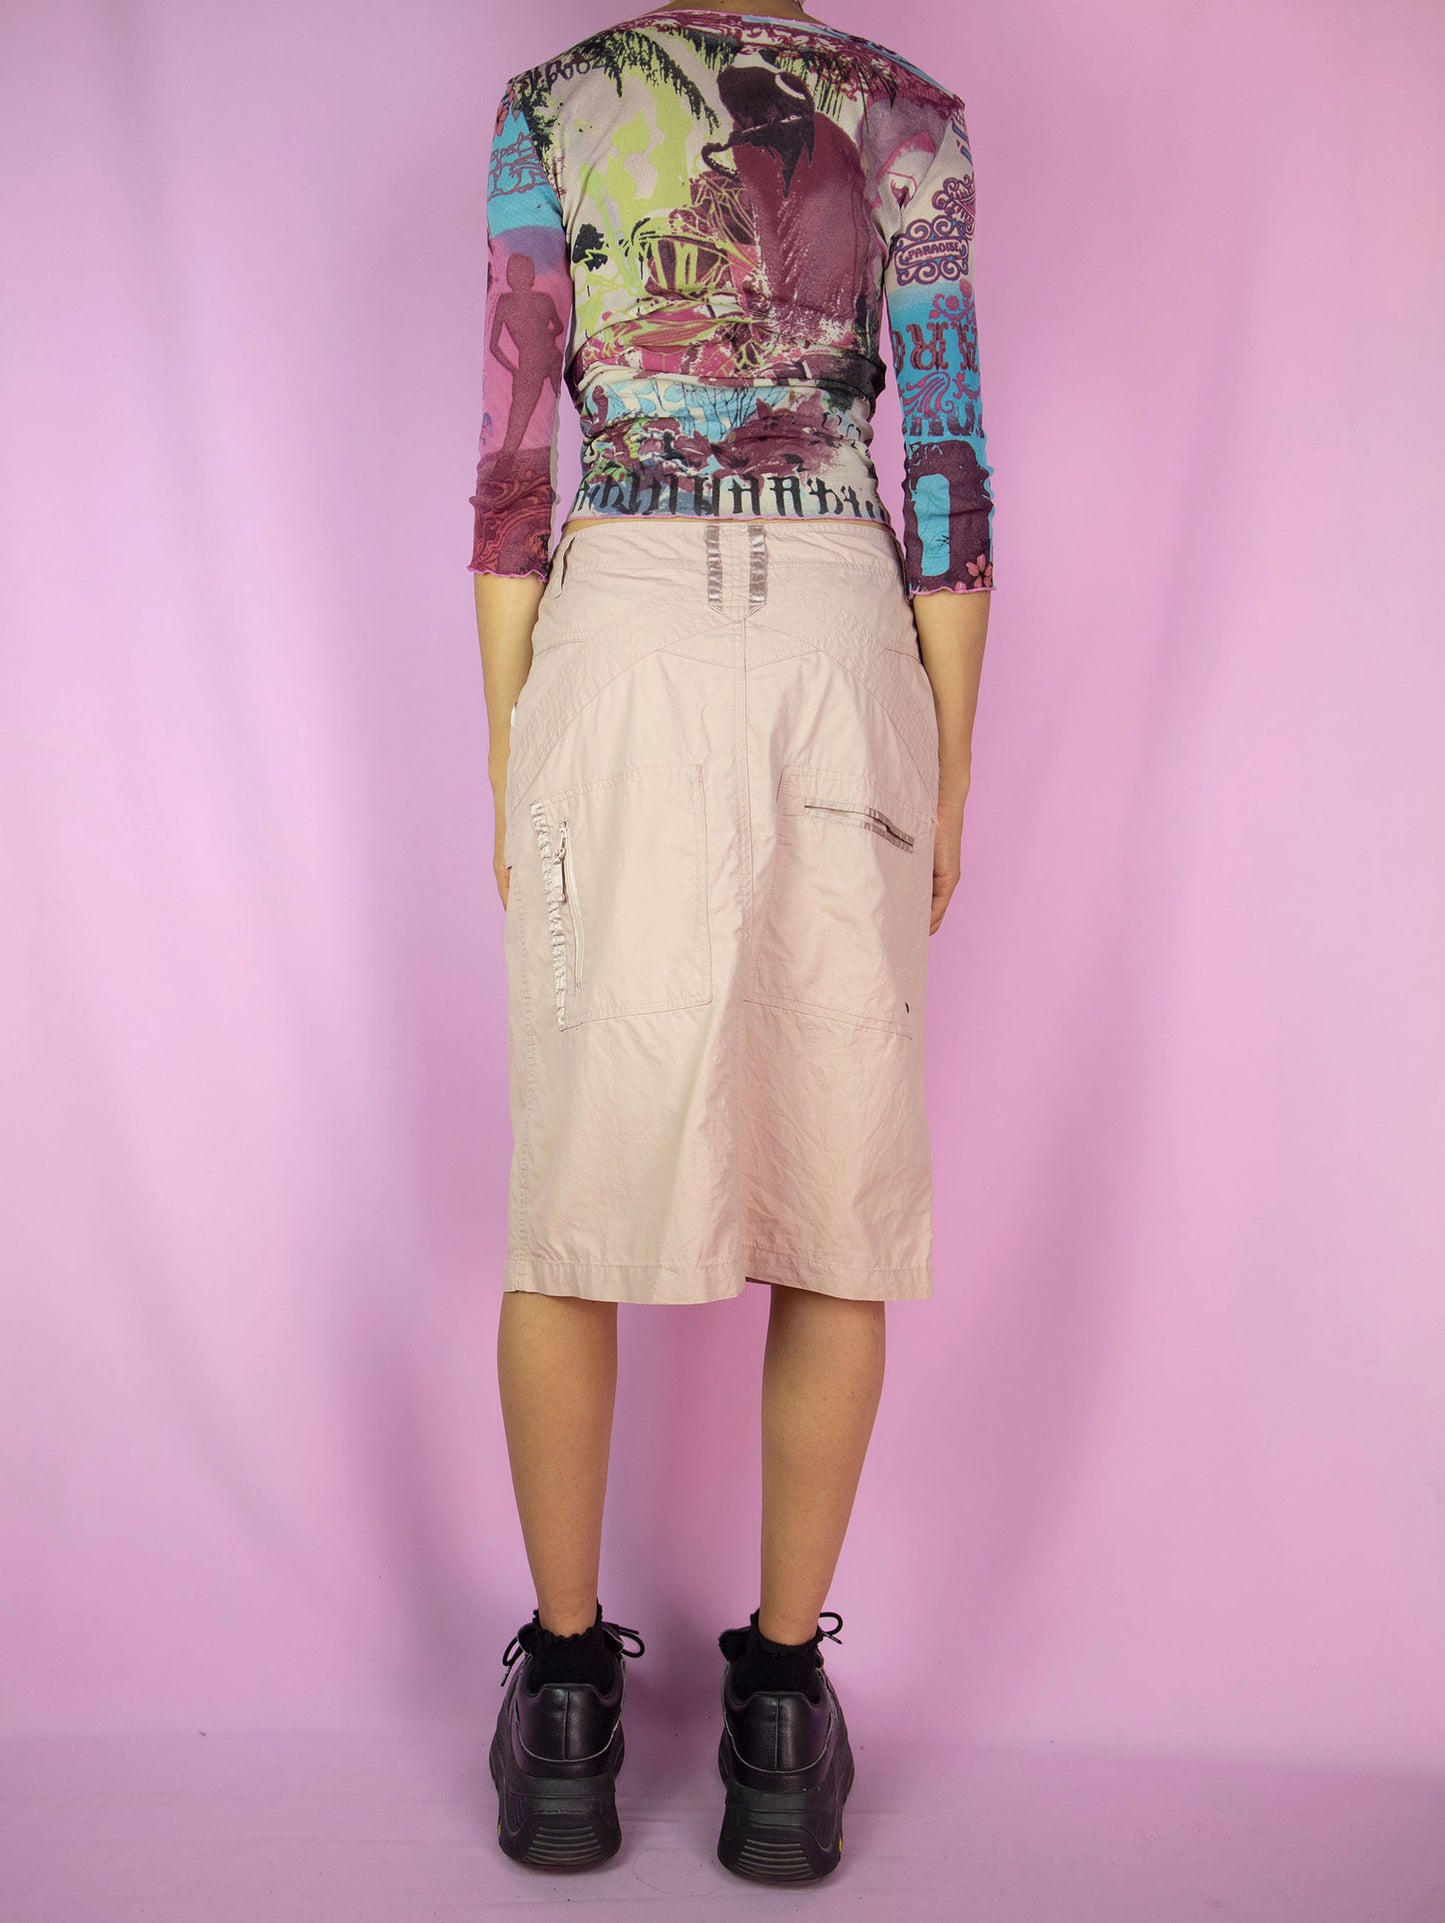 The Y2K Pink Grunge Cargo Skirt is a vintage light pink beige skirt with pockets and a front zip closure. Cyber gorpcore 2000s utility midi skirt.